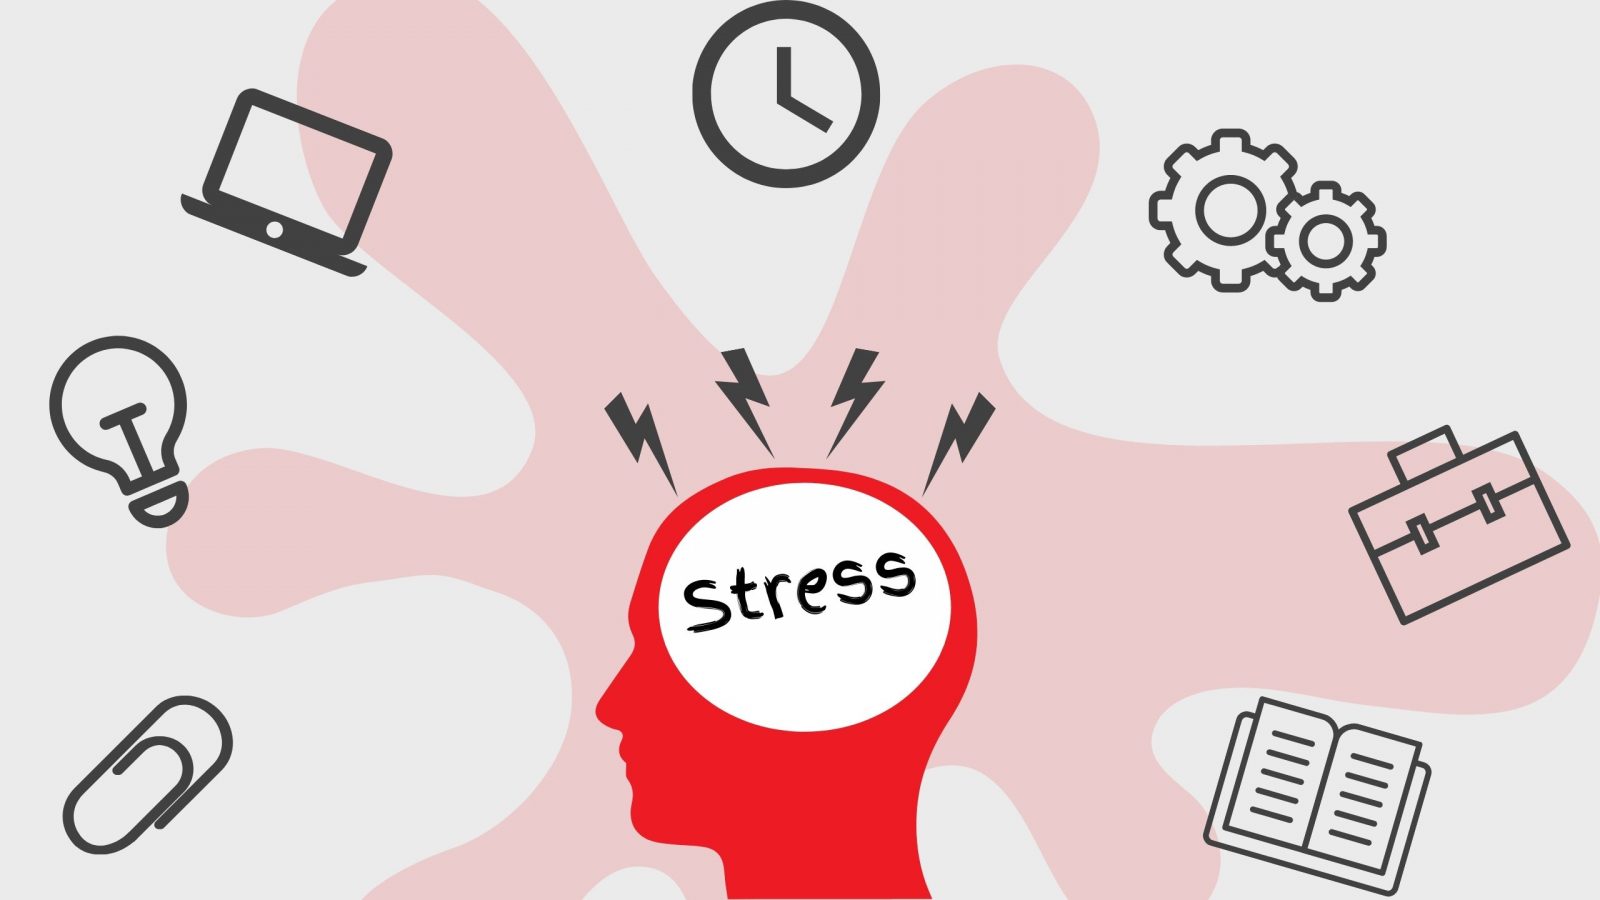 stress and mental health